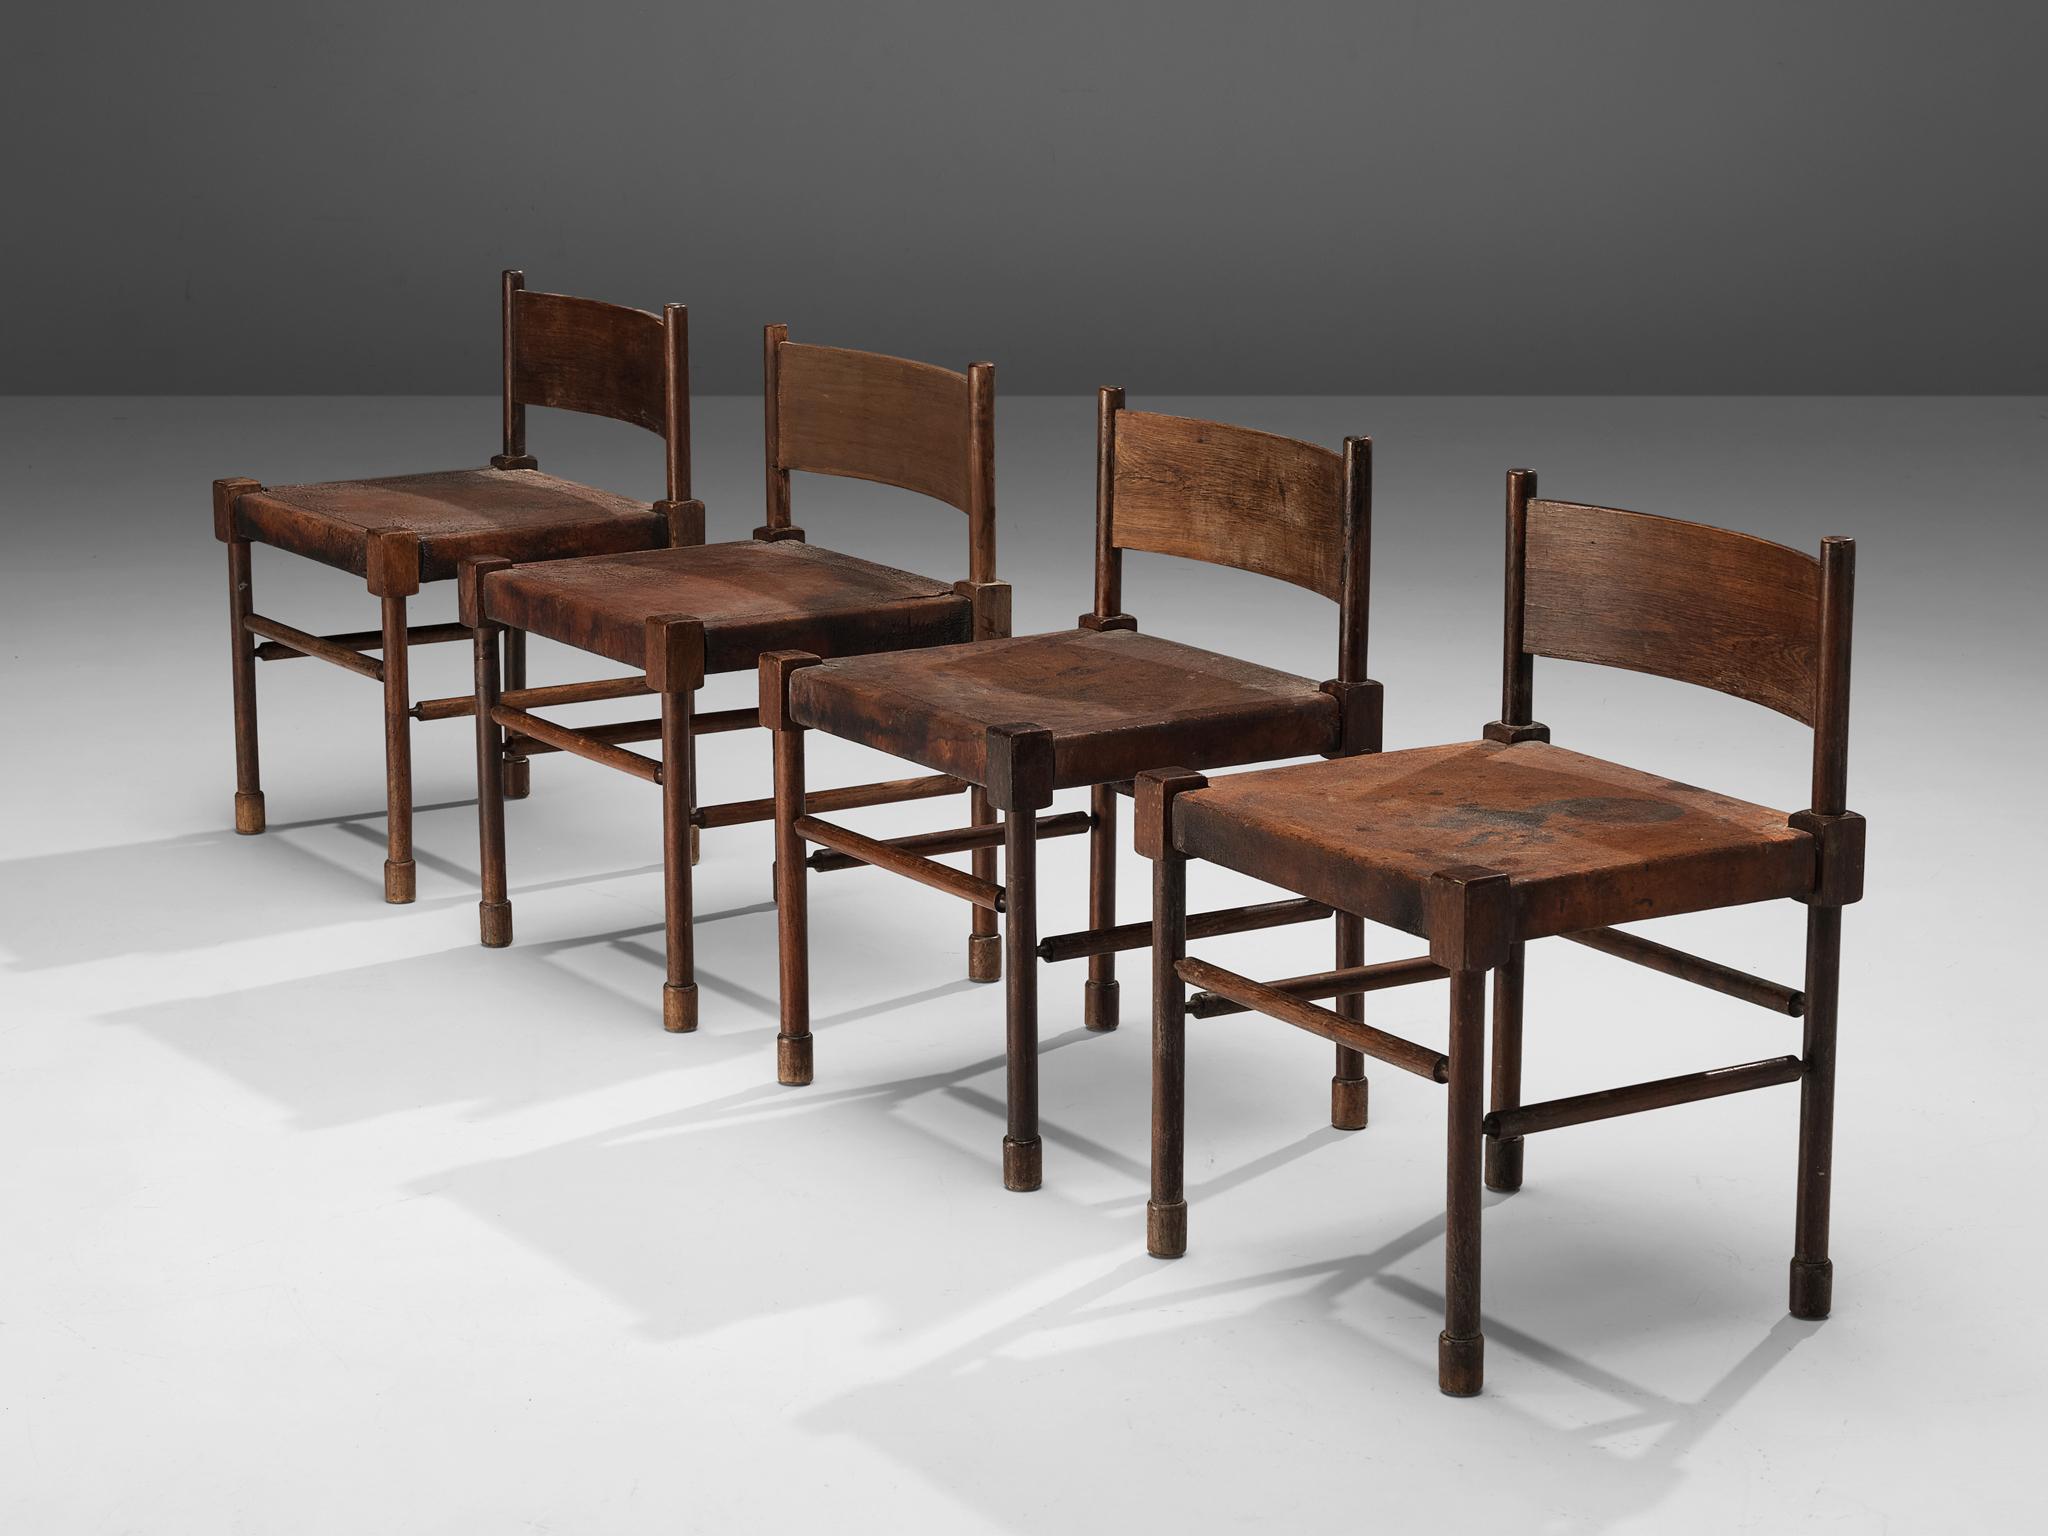 Set of four side chairs, stained wood, patinated leather, Brazil, 1940s

Rare side chair with sculpted frame in stained wood and leather seat. What makes this design so unique is the way the designer played with proportions and shapes. The detailed